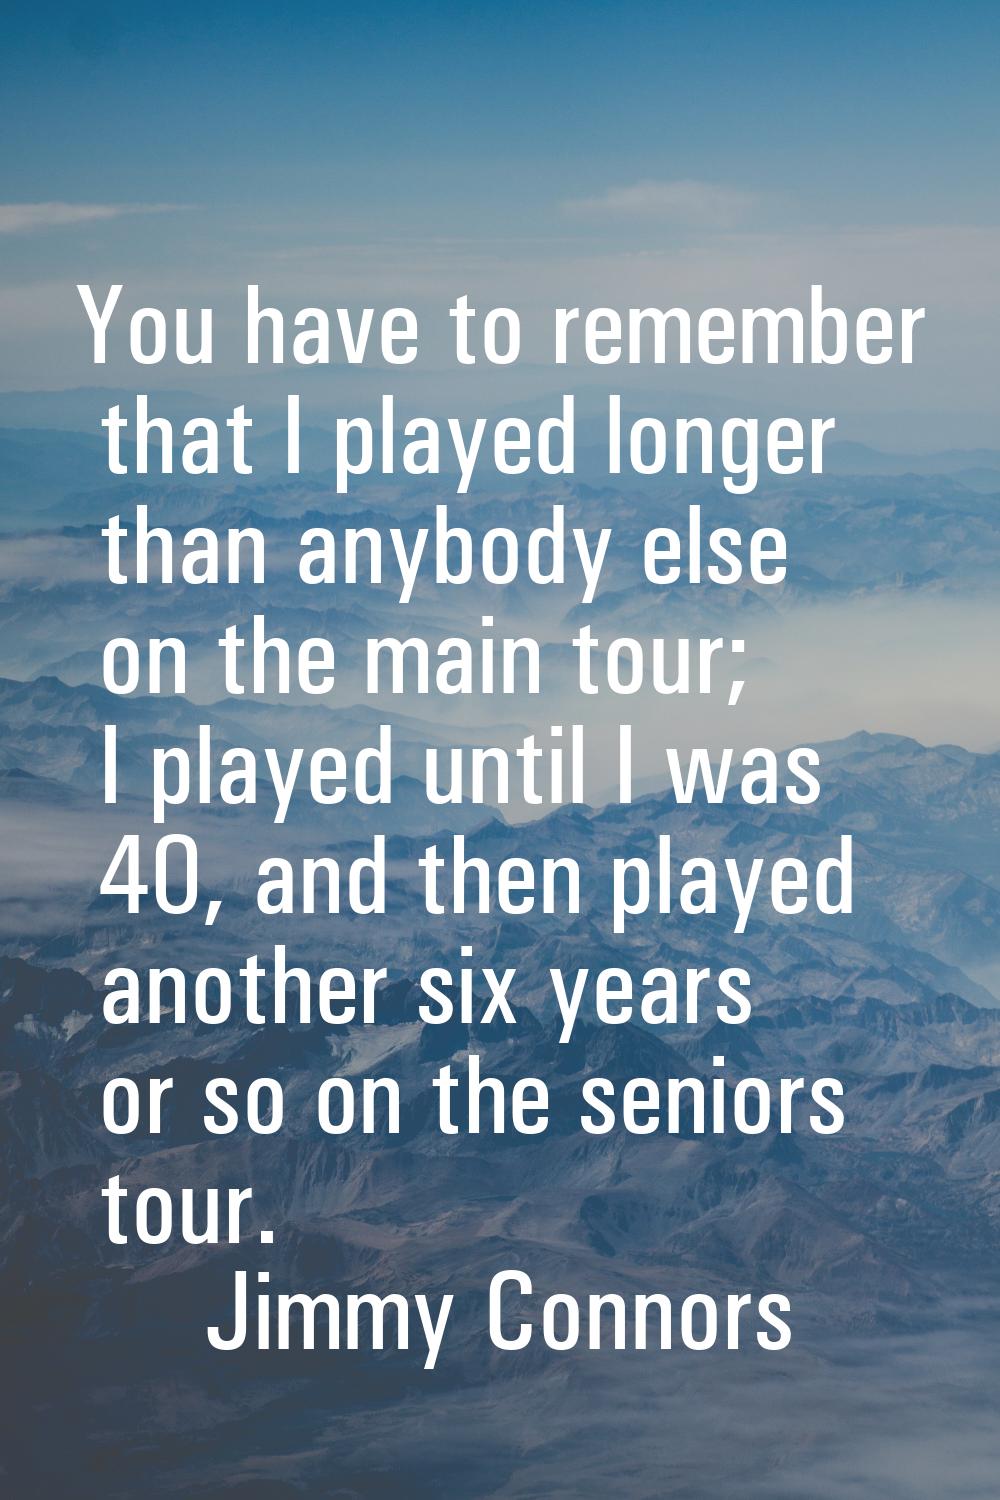 You have to remember that I played longer than anybody else on the main tour; I played until I was 